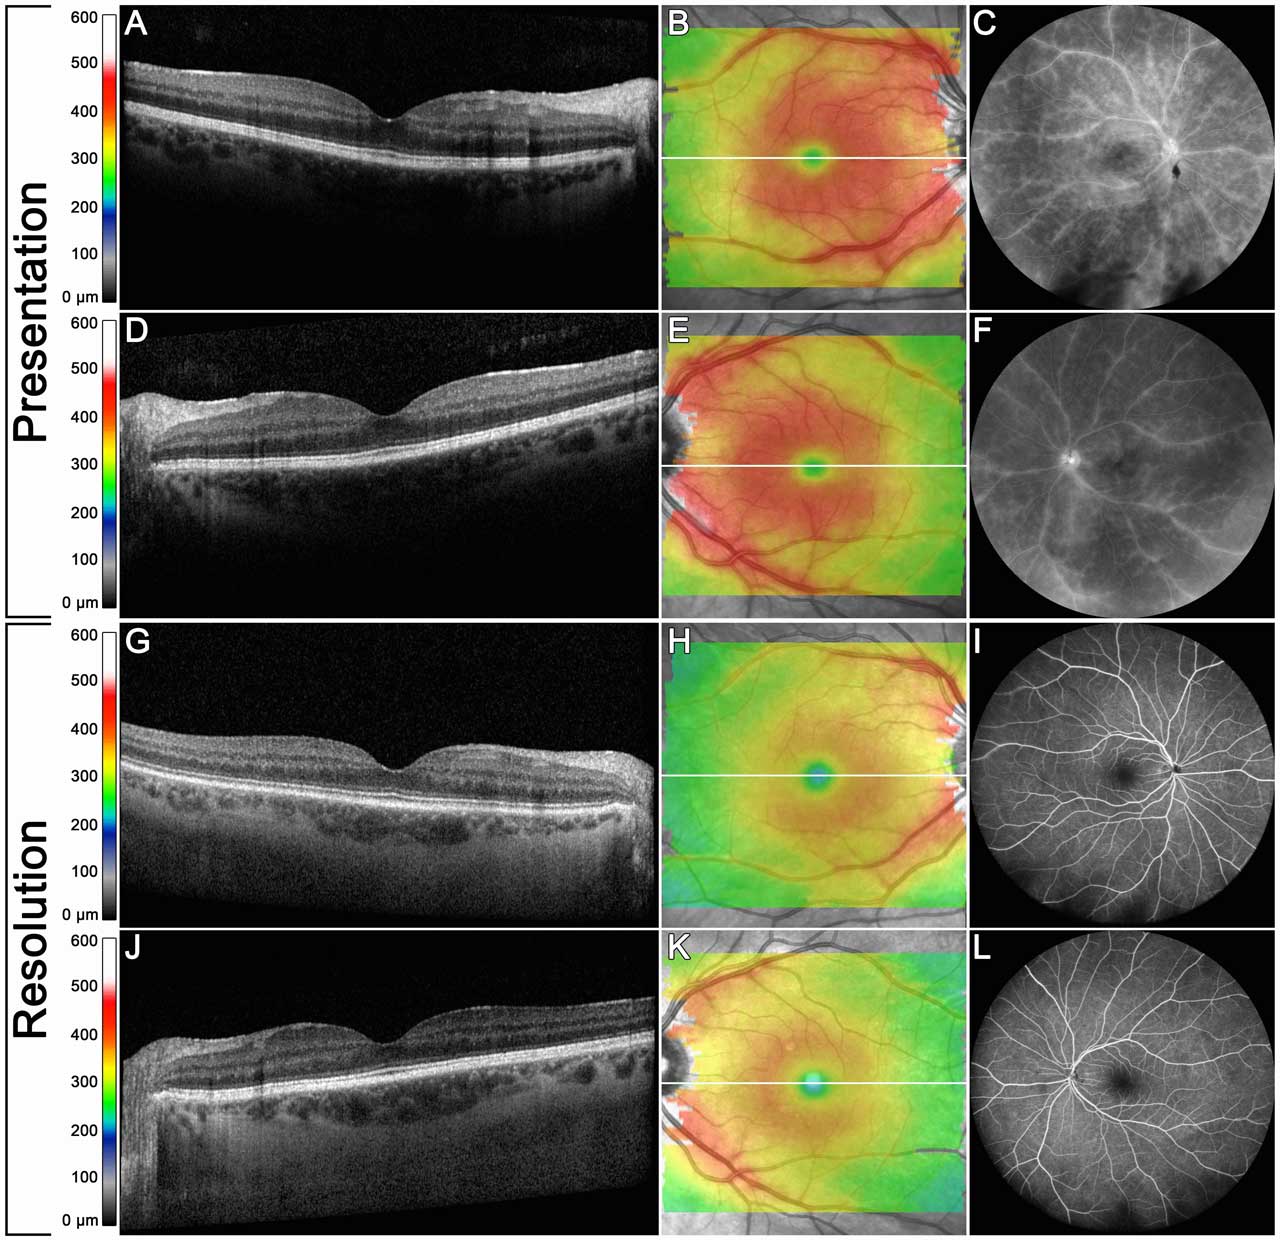 Figure 1. A 41-year-old female with intermediate uveitis and retinal vasculitis in both eyes. On presentation, optical coherence tomography (OCT) B-scans show no evidence of cystoid macular edema in either eye (A, D). Retinal thickness maps demonstrate macular and perivascular thickening in both eyes (B, E). Late frames on fluorescein angiography demonstrate diffuse small and large vessel vasculitis and optic nerve hyperfluorescence (C, F). After treatment, OCT B-scans show no significant change (G, J). Retinal thickness maps demonstrated overall significant reduction of macular and perivascular thickness (H, K). Fluorescein angiography shows resolution of vasculitis (I, L).